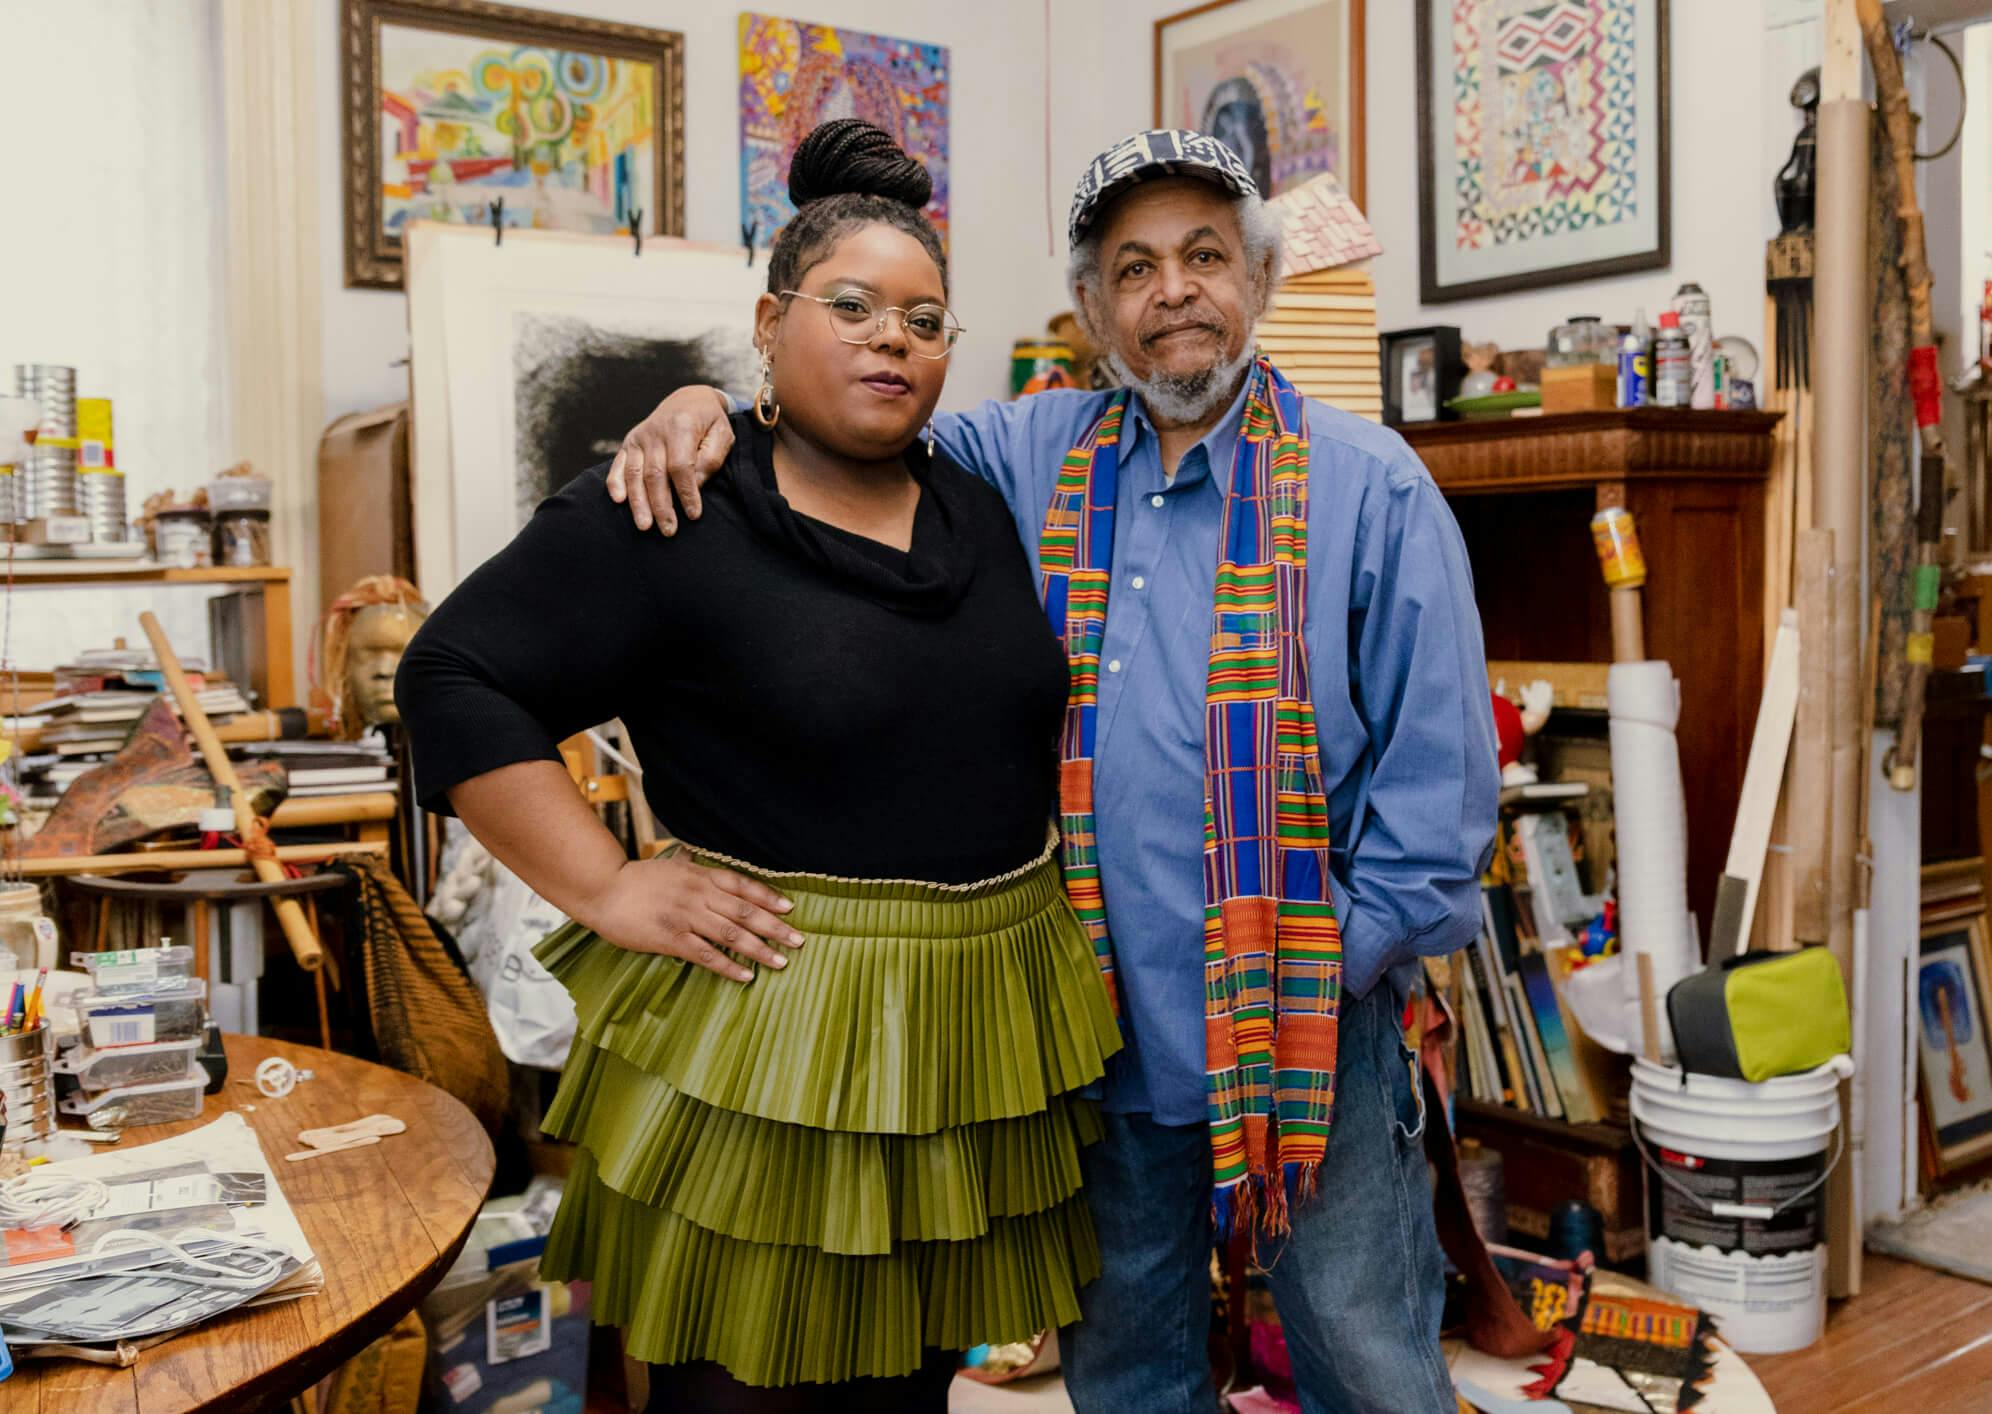 Chanel Thervil and Napoleon Jones-Henderson stand in an artist studio with an array of materials in the background.